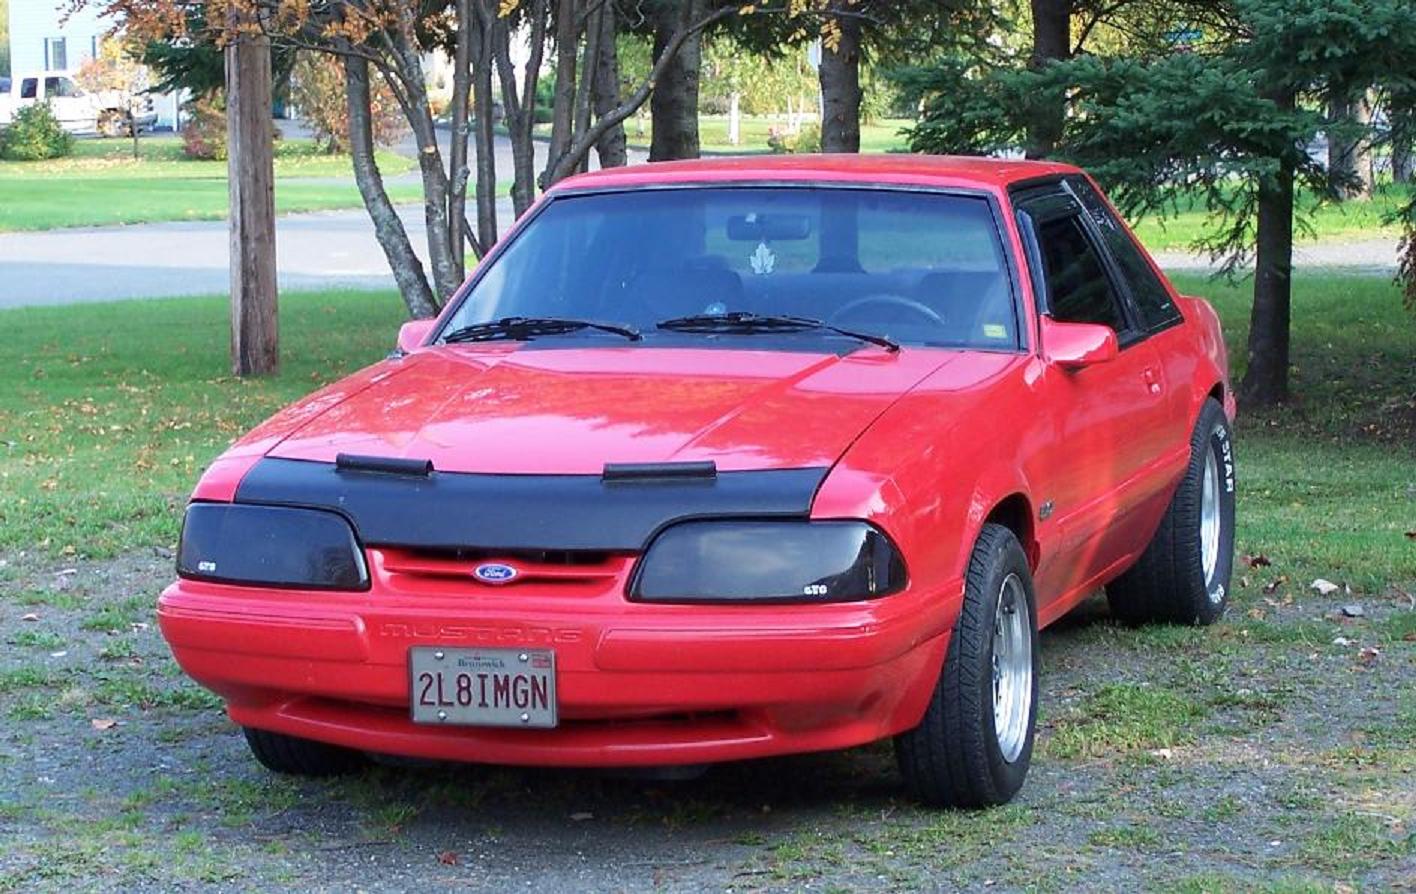  1990 Ford Mustang lx notchback